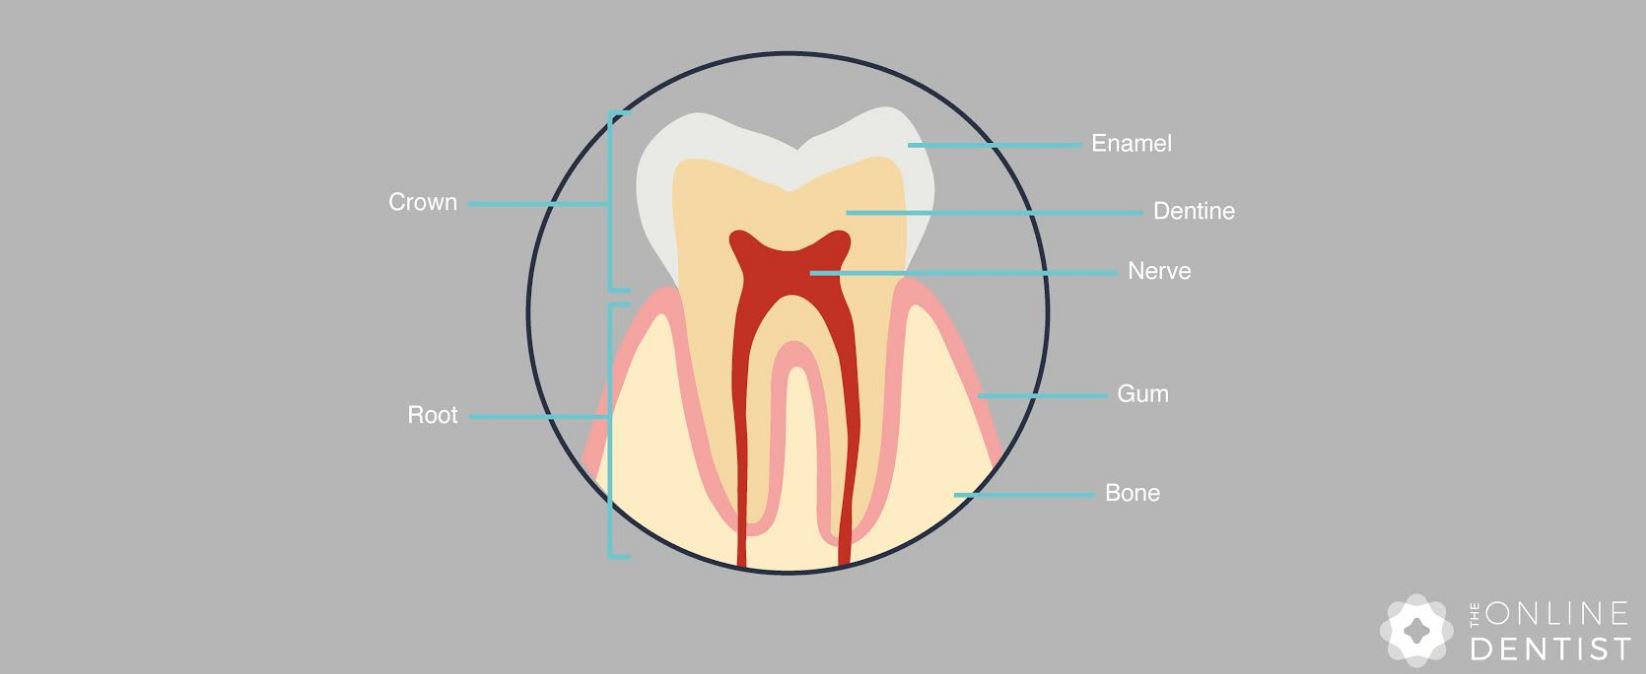 Tooth diagram